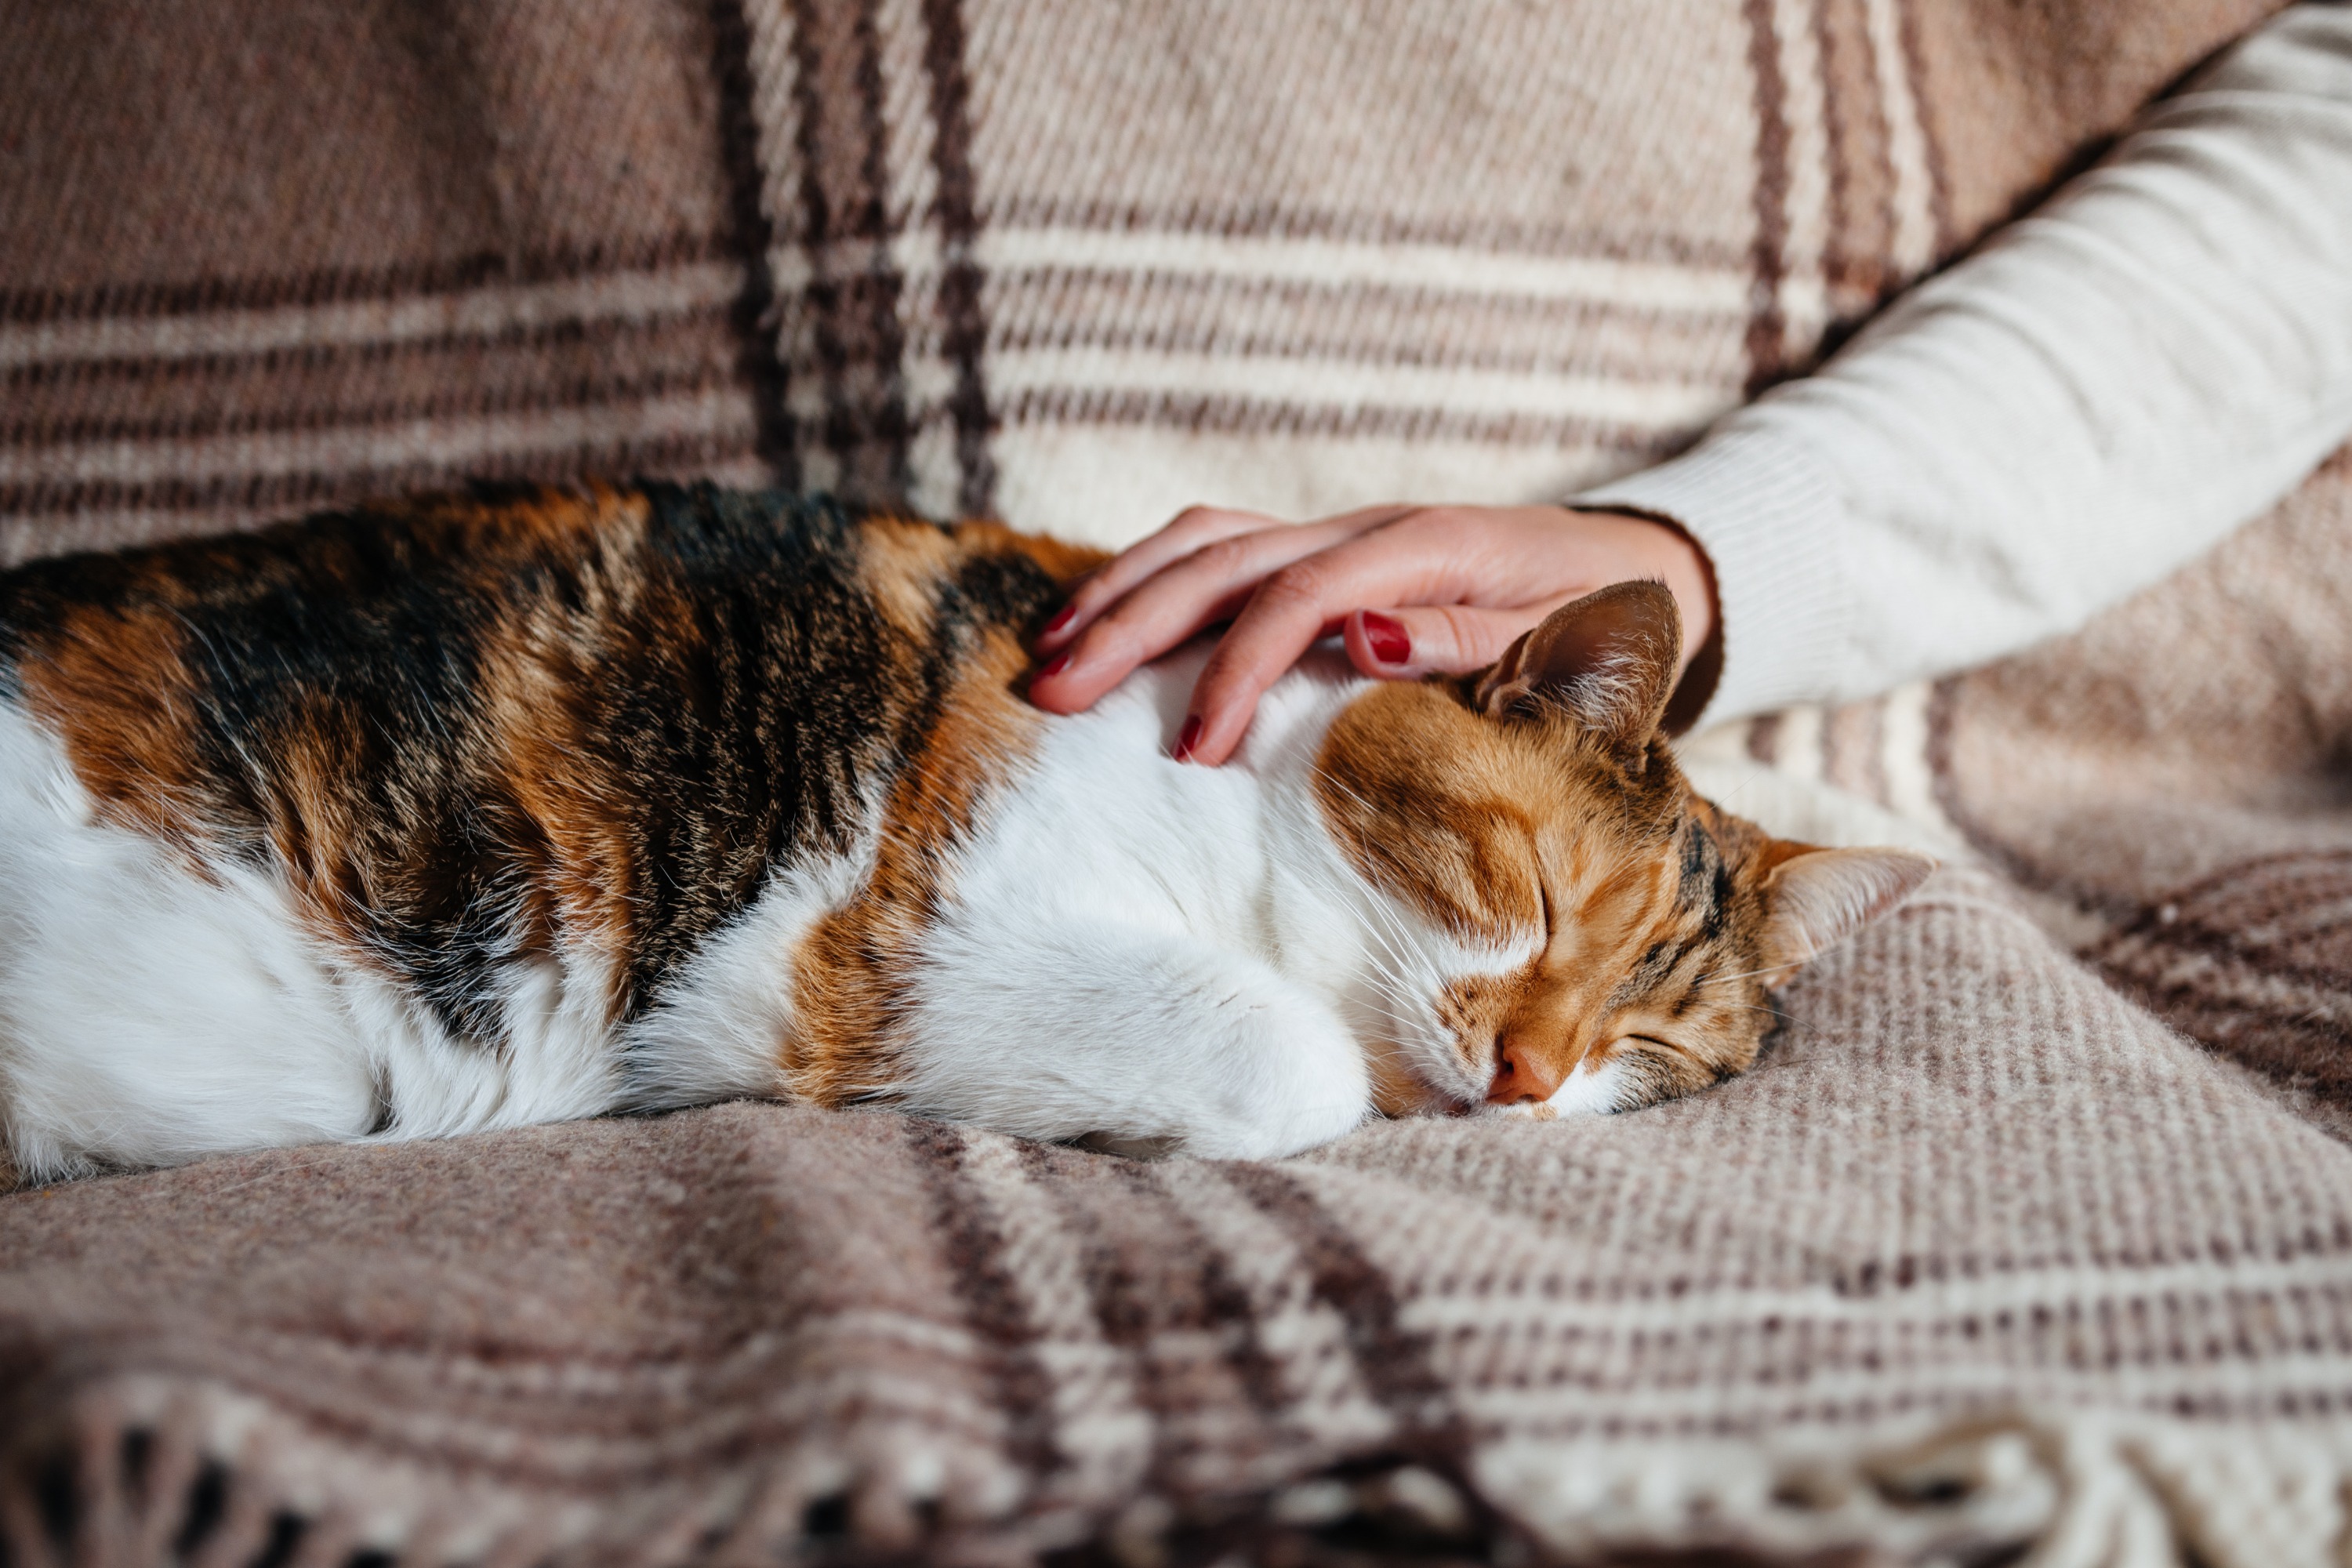 A woman wearing a cream sweater and red nail polish pets a calico cat with orange, black, and white markings on a brown plaid blanket.